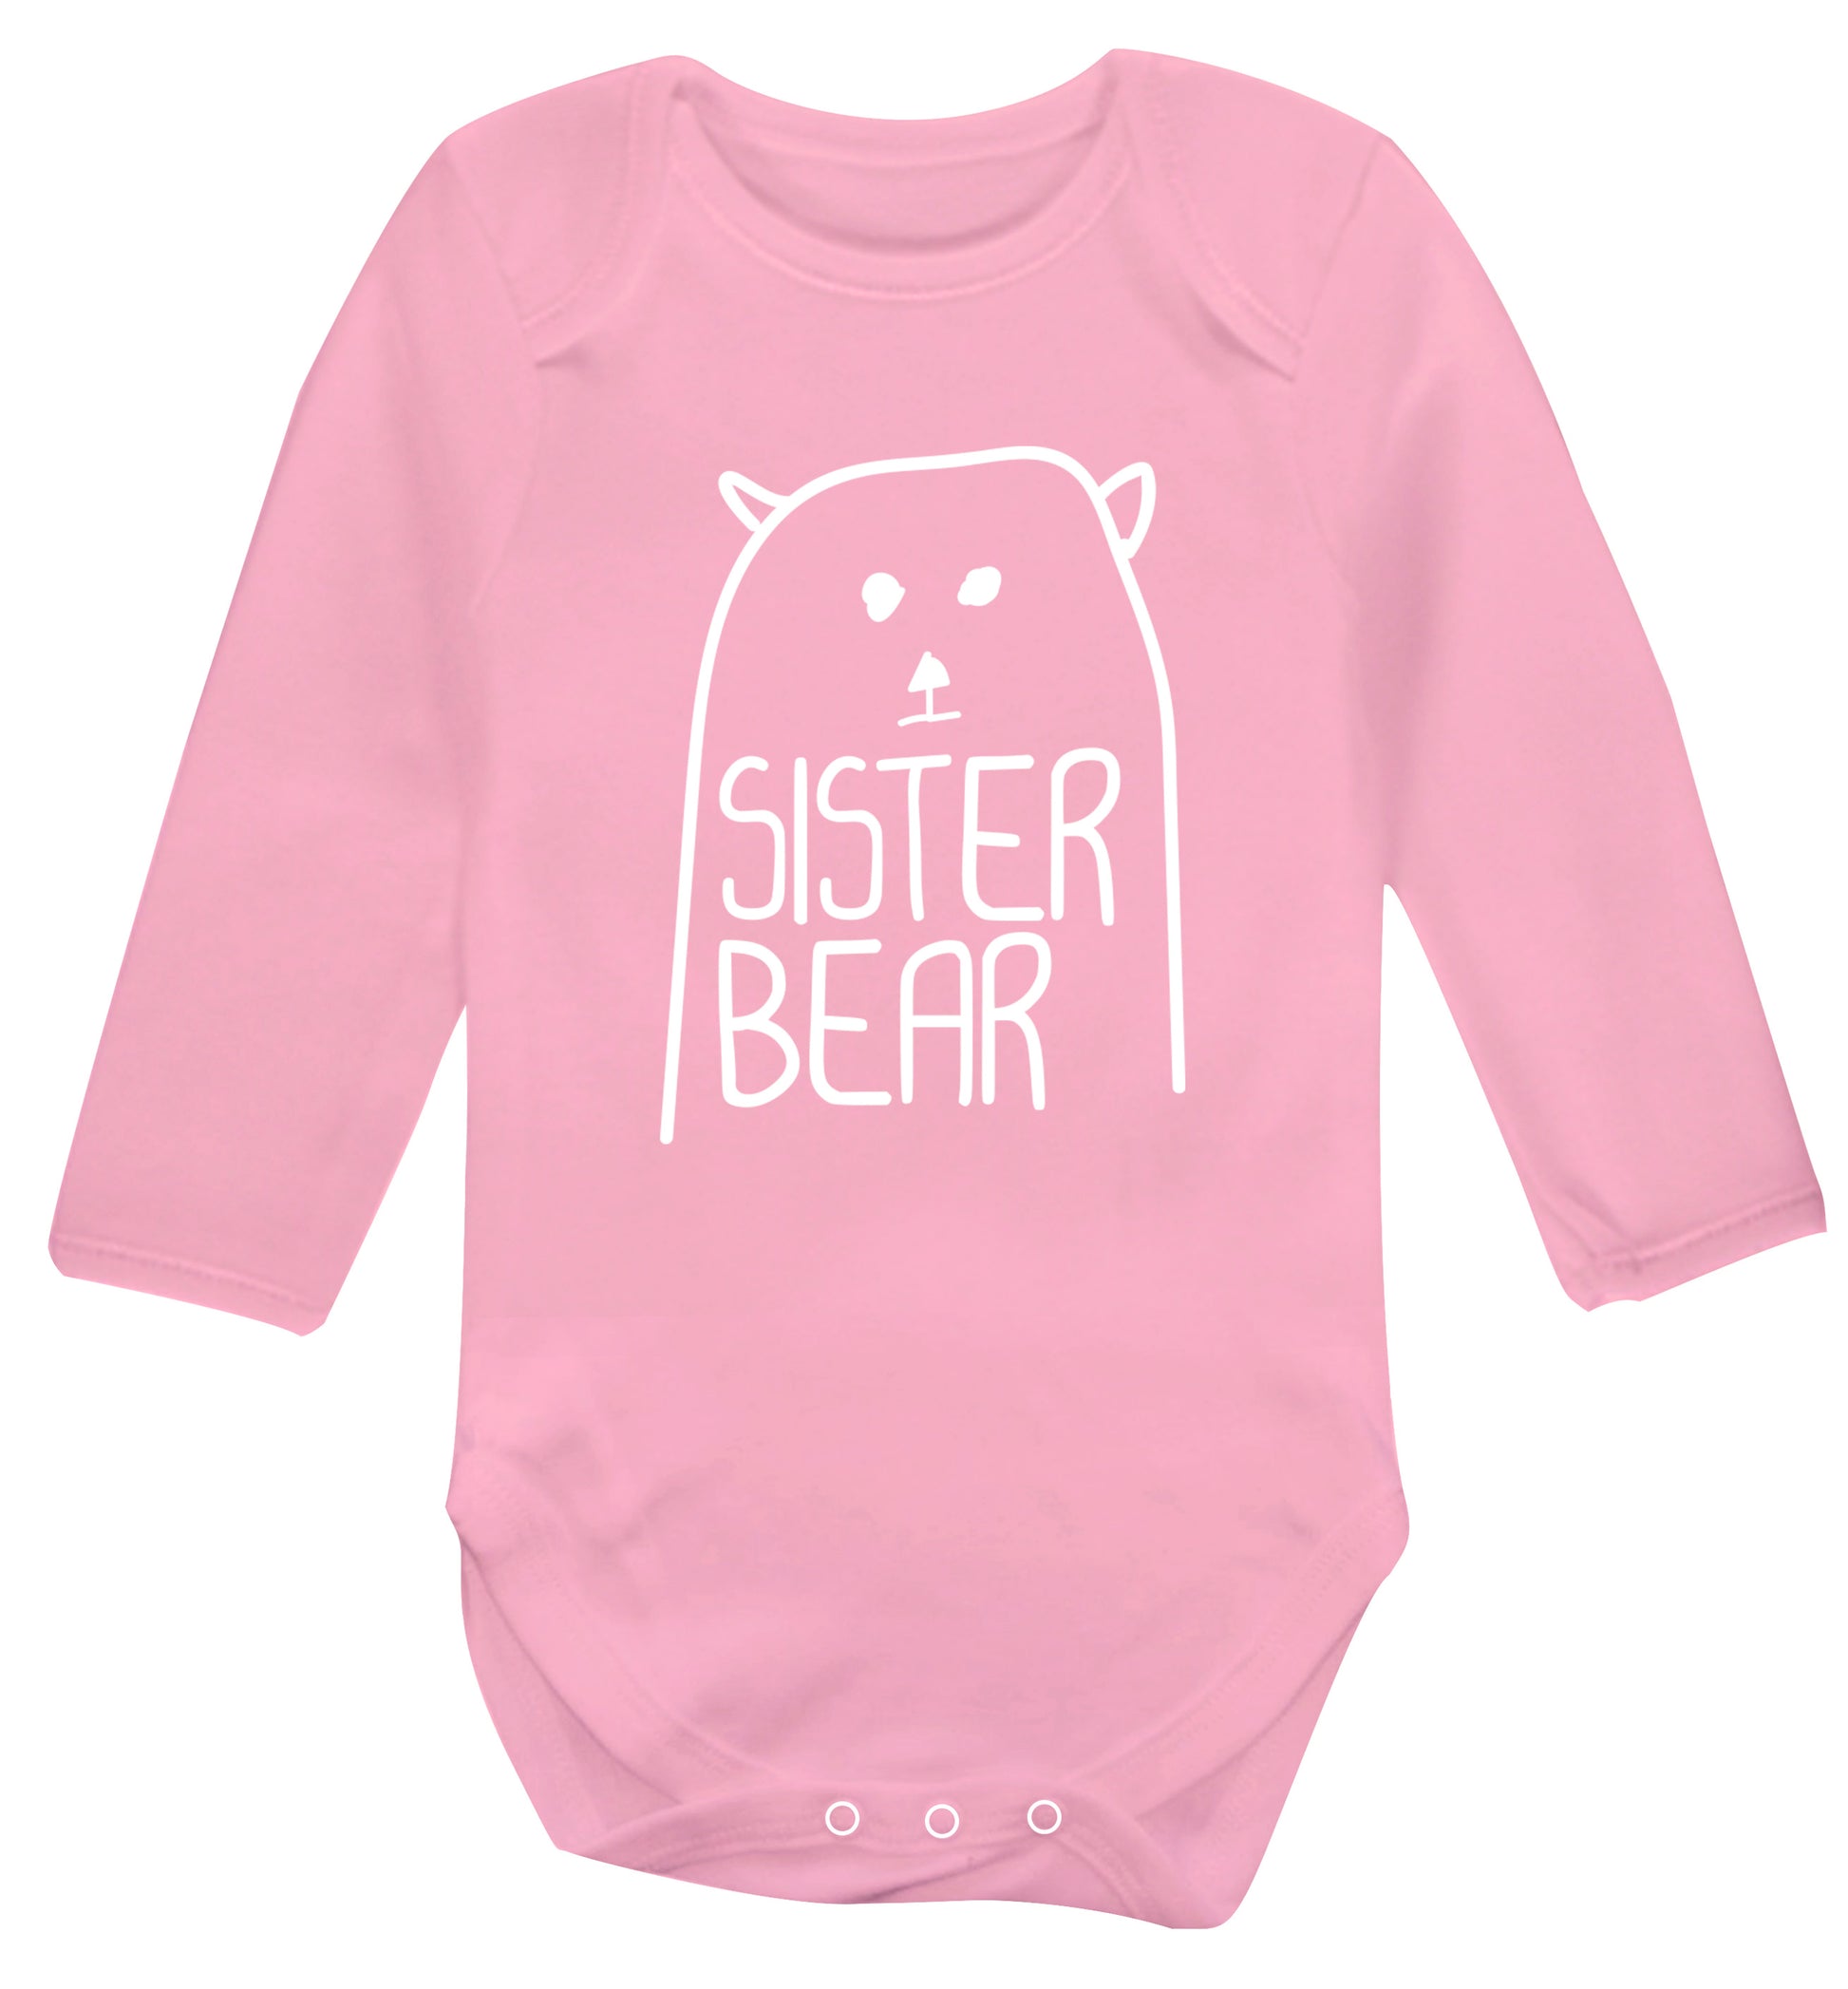 Sister bear Baby Vest long sleeved pale pink 6-12 months